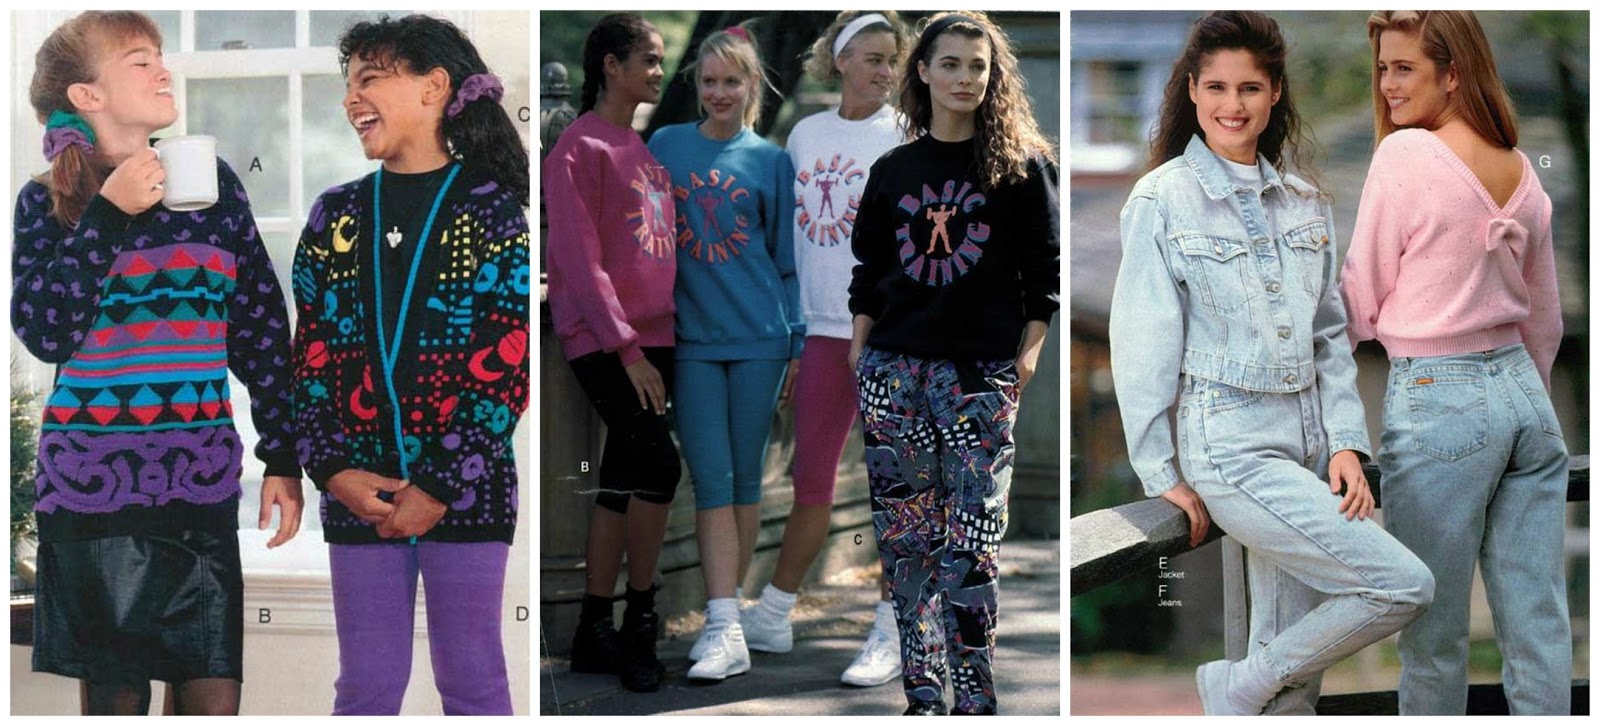 The changing fashions of children and teens